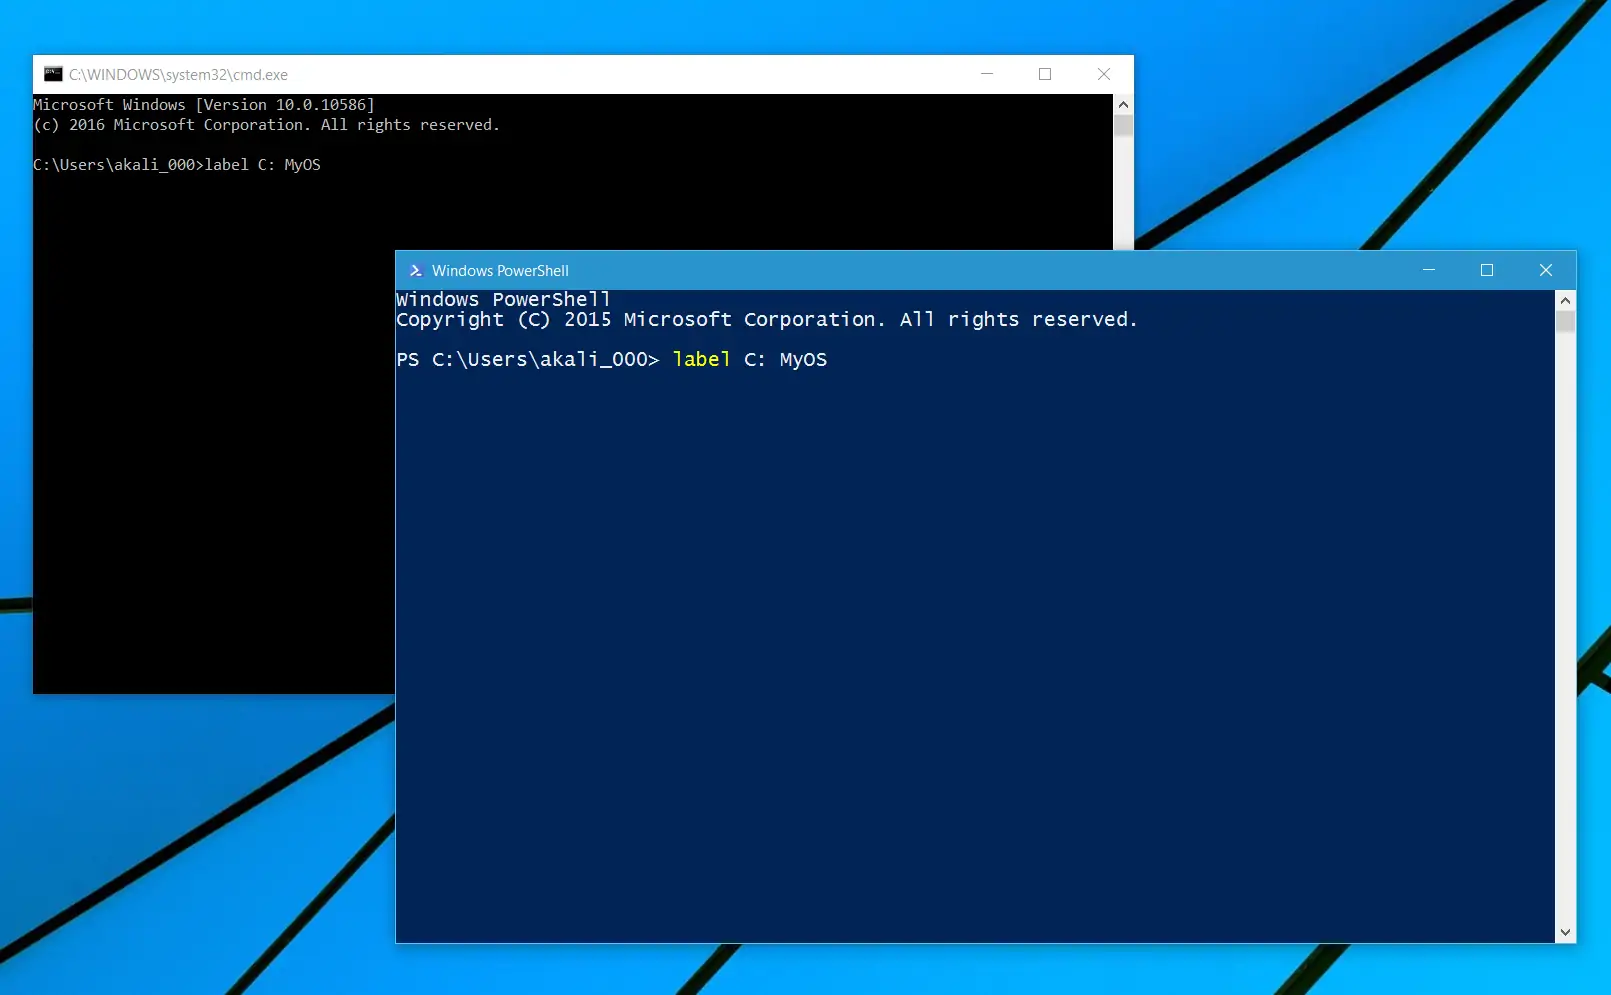 Windows 10 - Renaming drives in Command Prompt and PowerShell